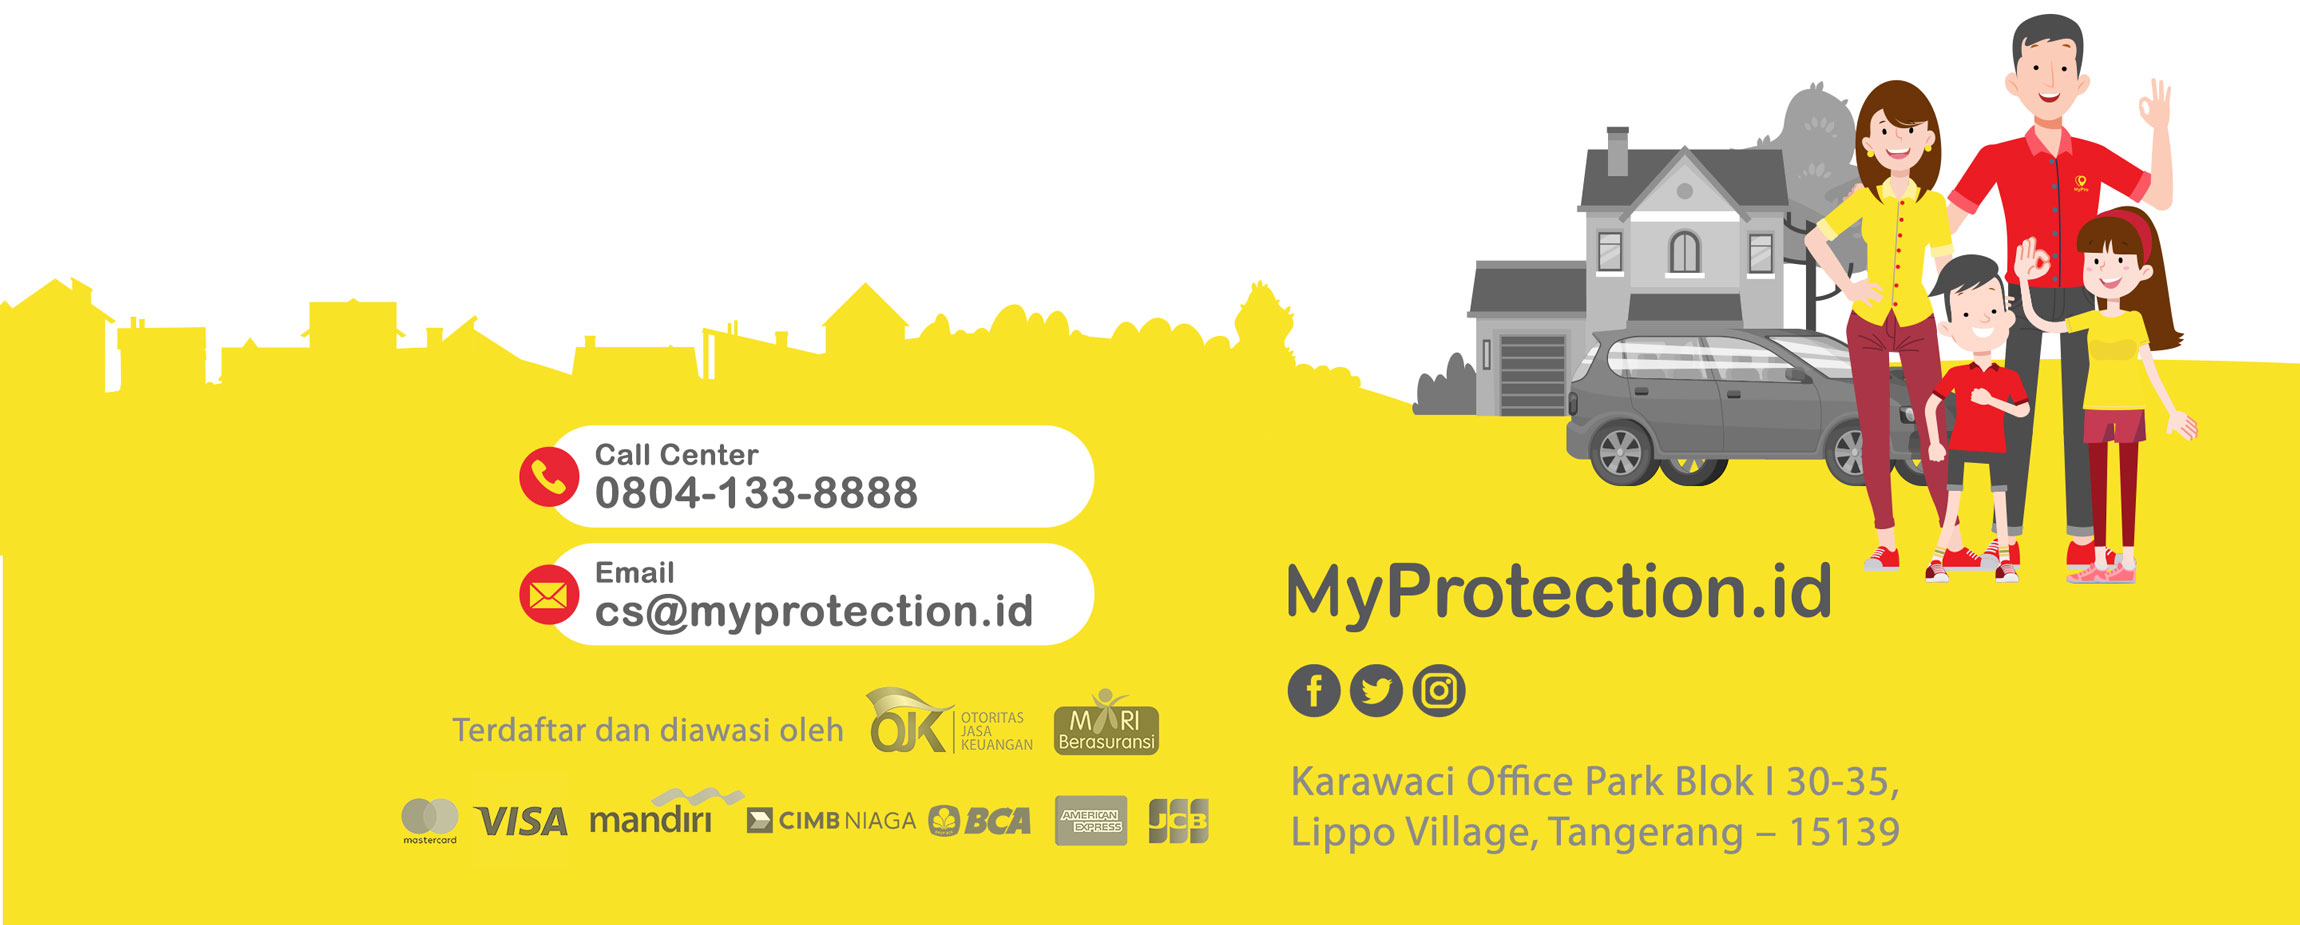 Copyright 2021 MyProtection.id